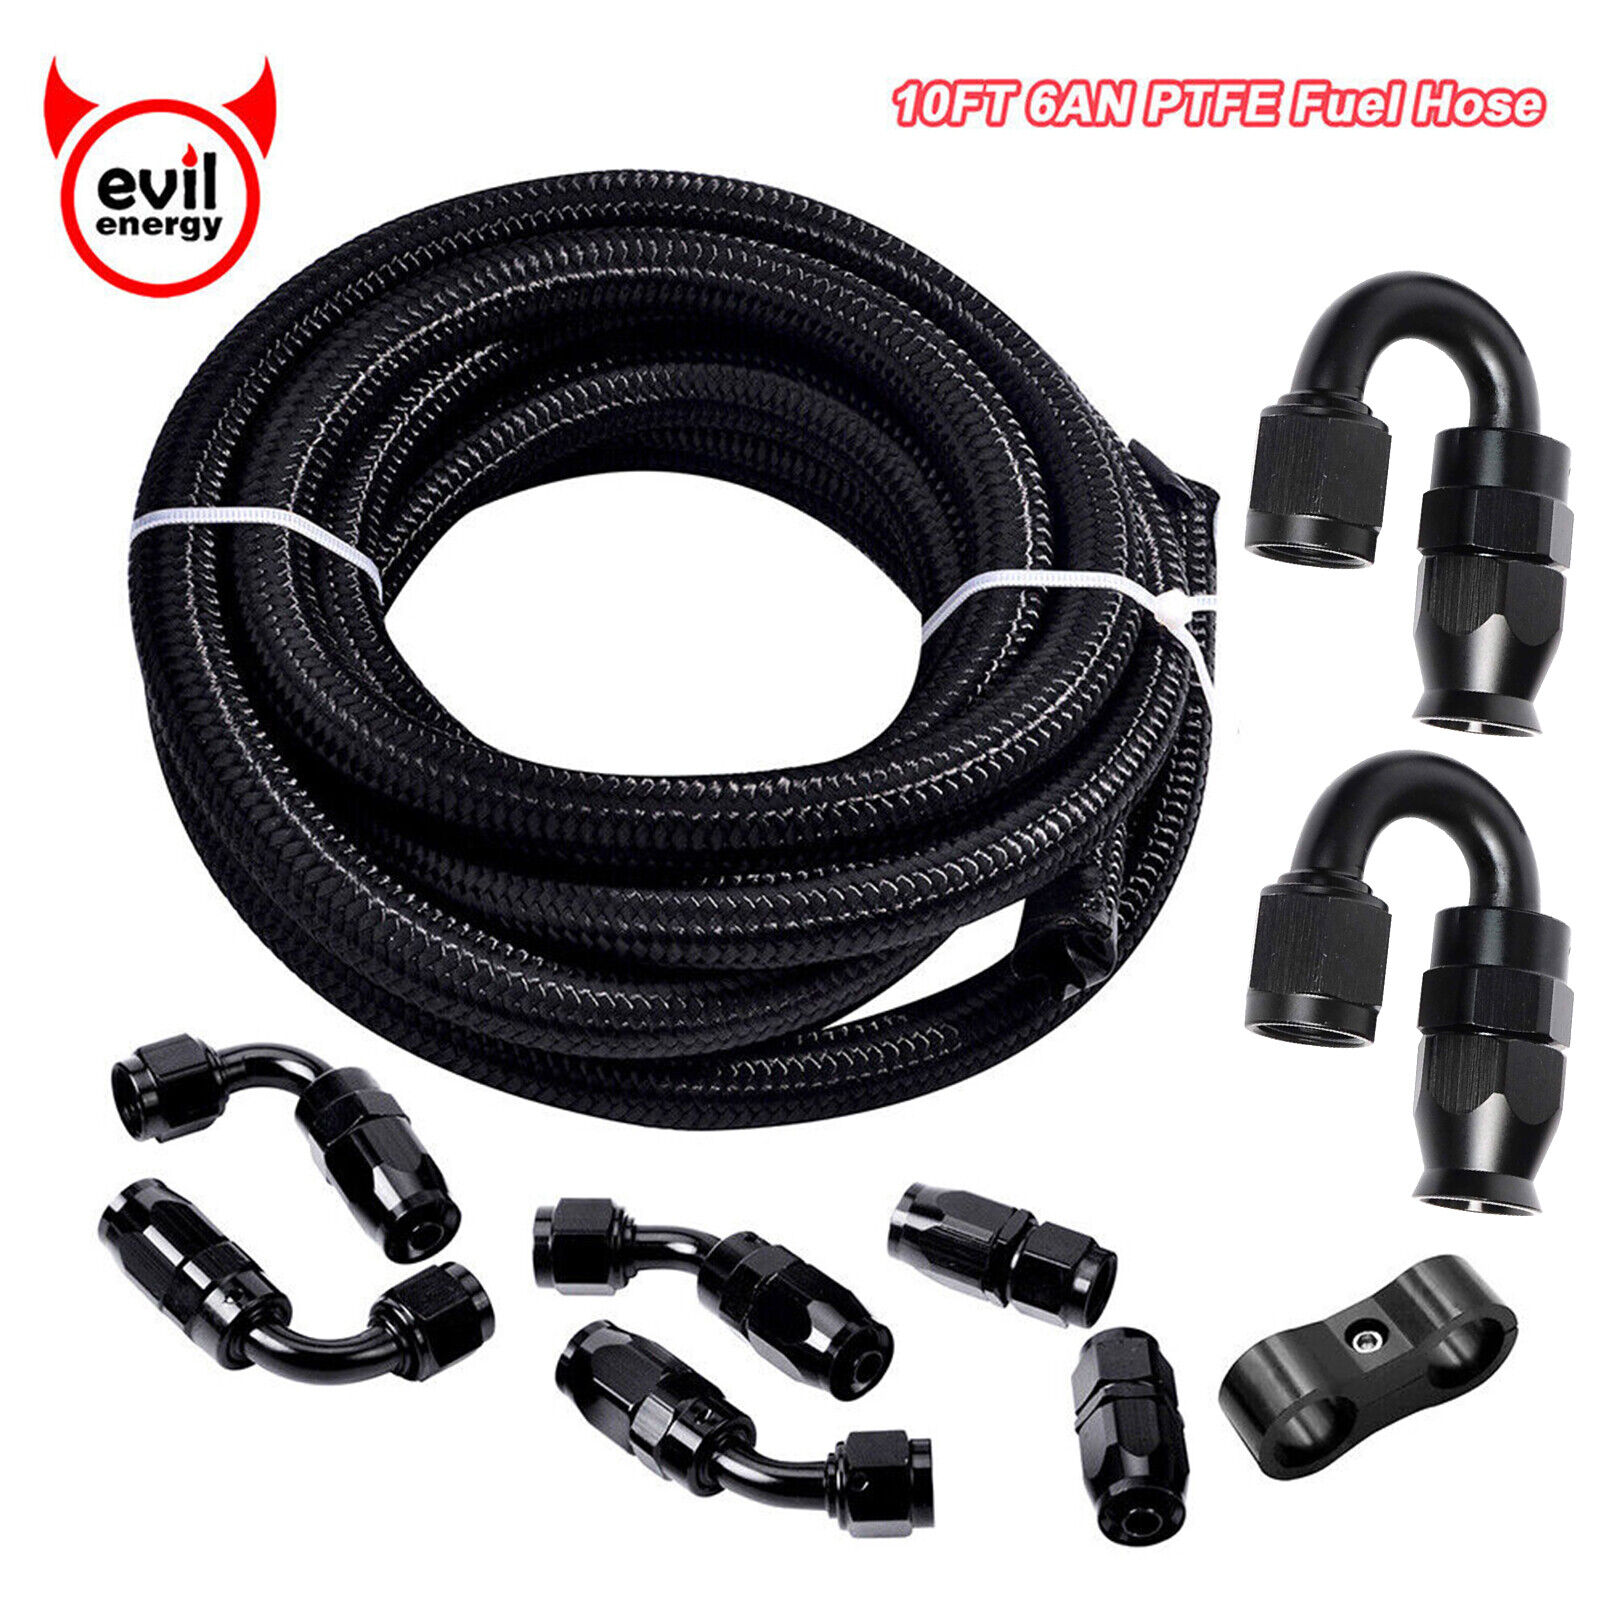 10FT 6AN Fitting Stainless Steel Nylon Braided Gas Oil Fuel Hose Line Kit 